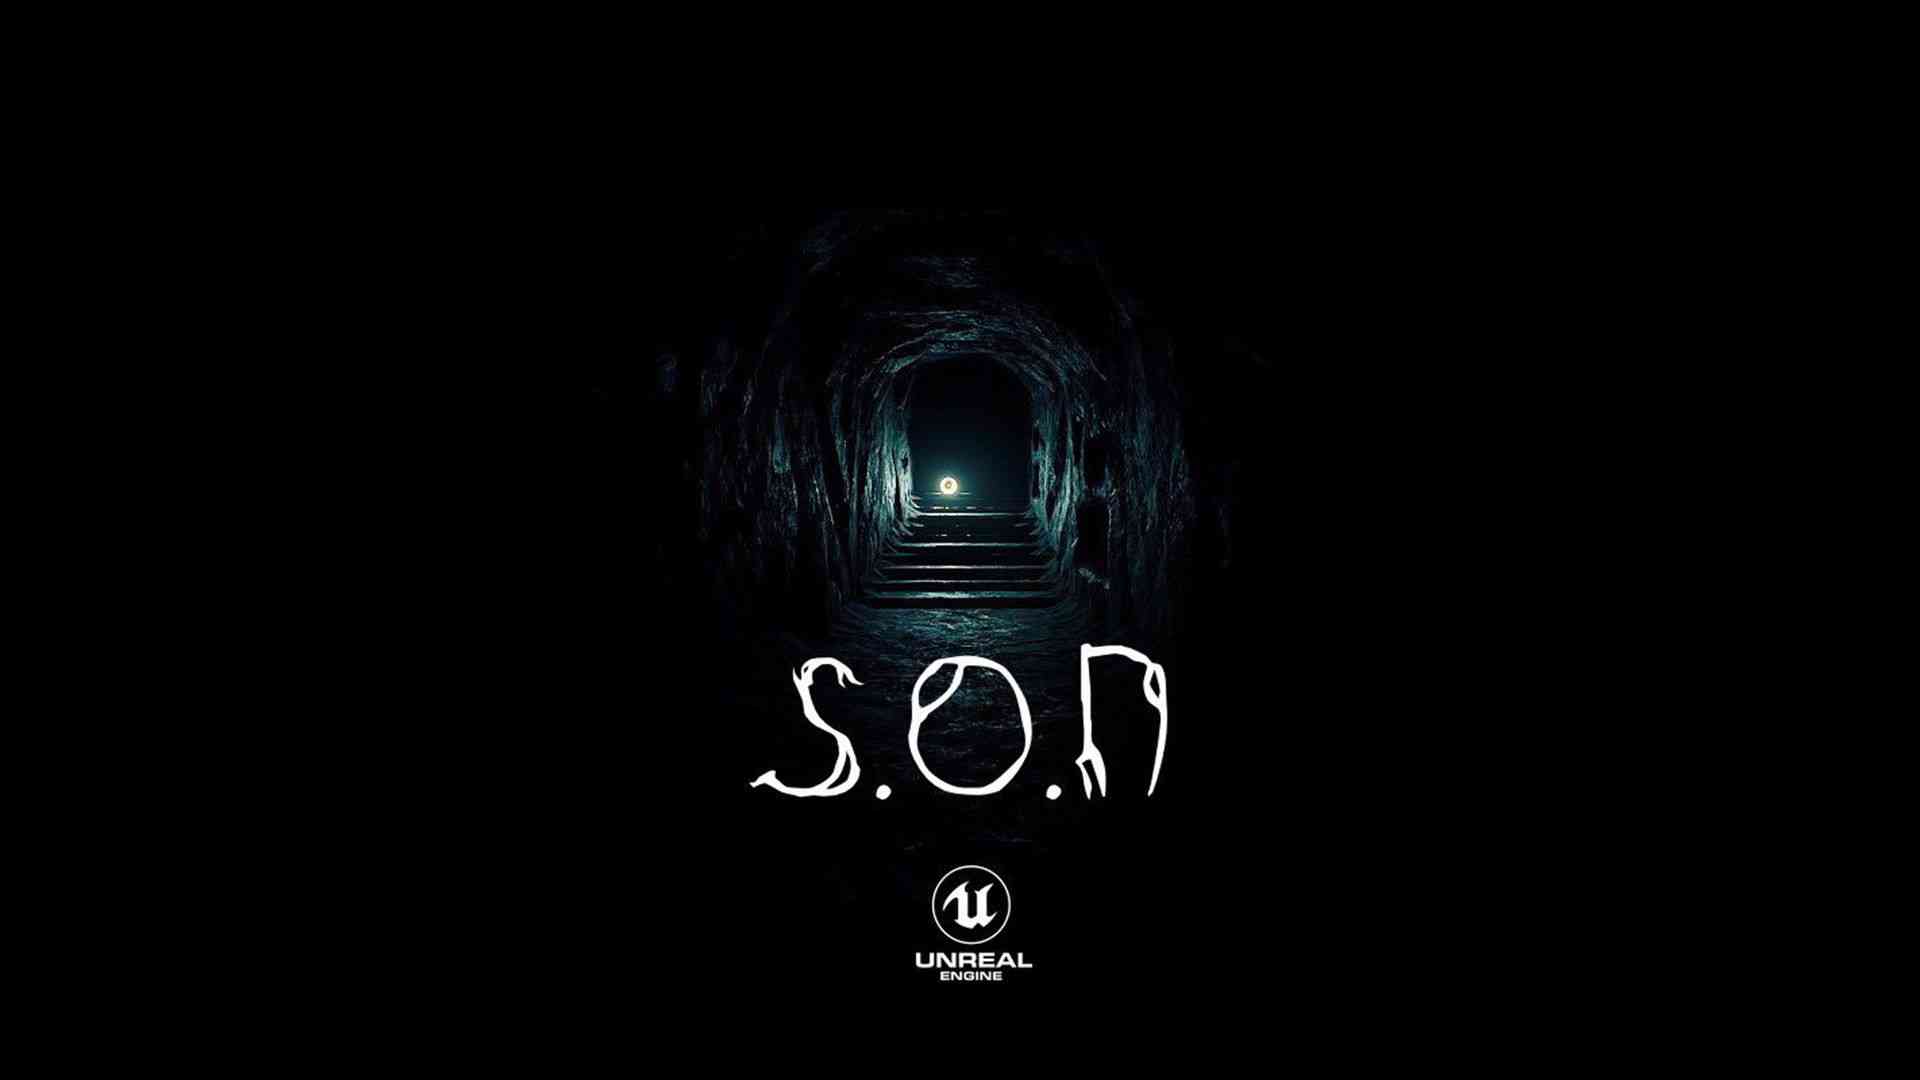 ps4 exclusive horror game s o n gets a release date and new trailer 1997 big 1